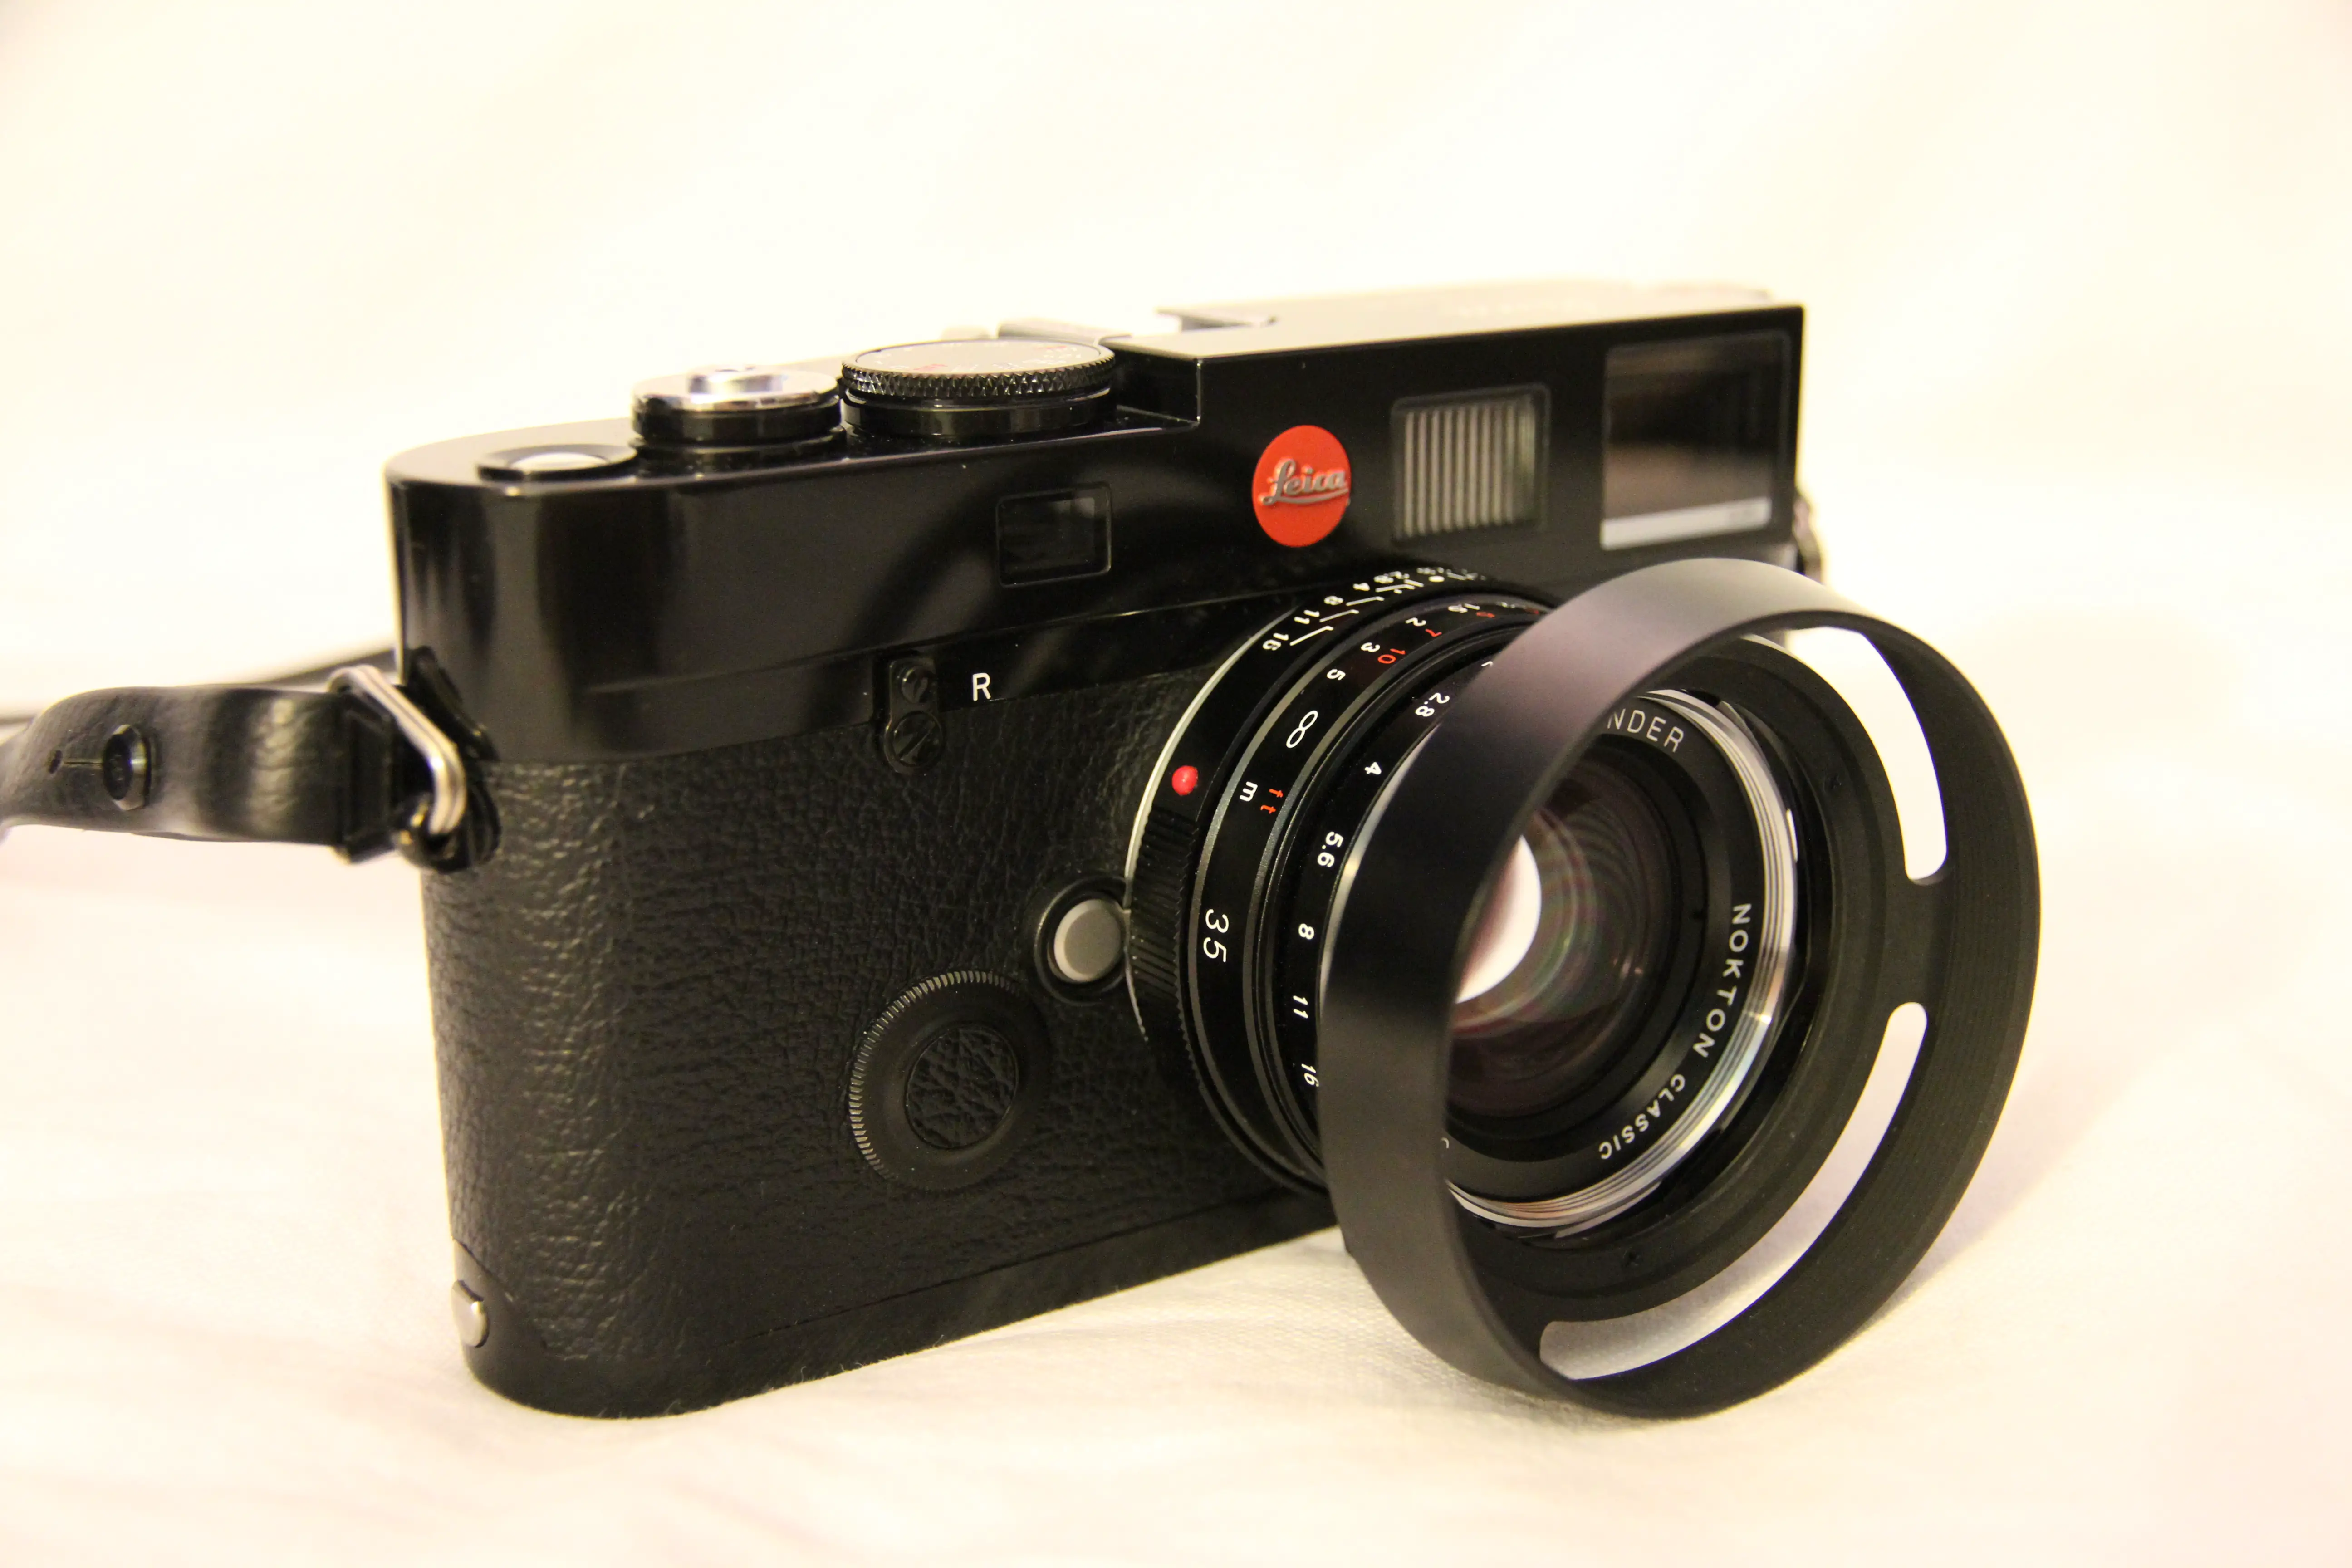 Leica M6 TTL Millennium NSH Special Edition Review by Ebb 